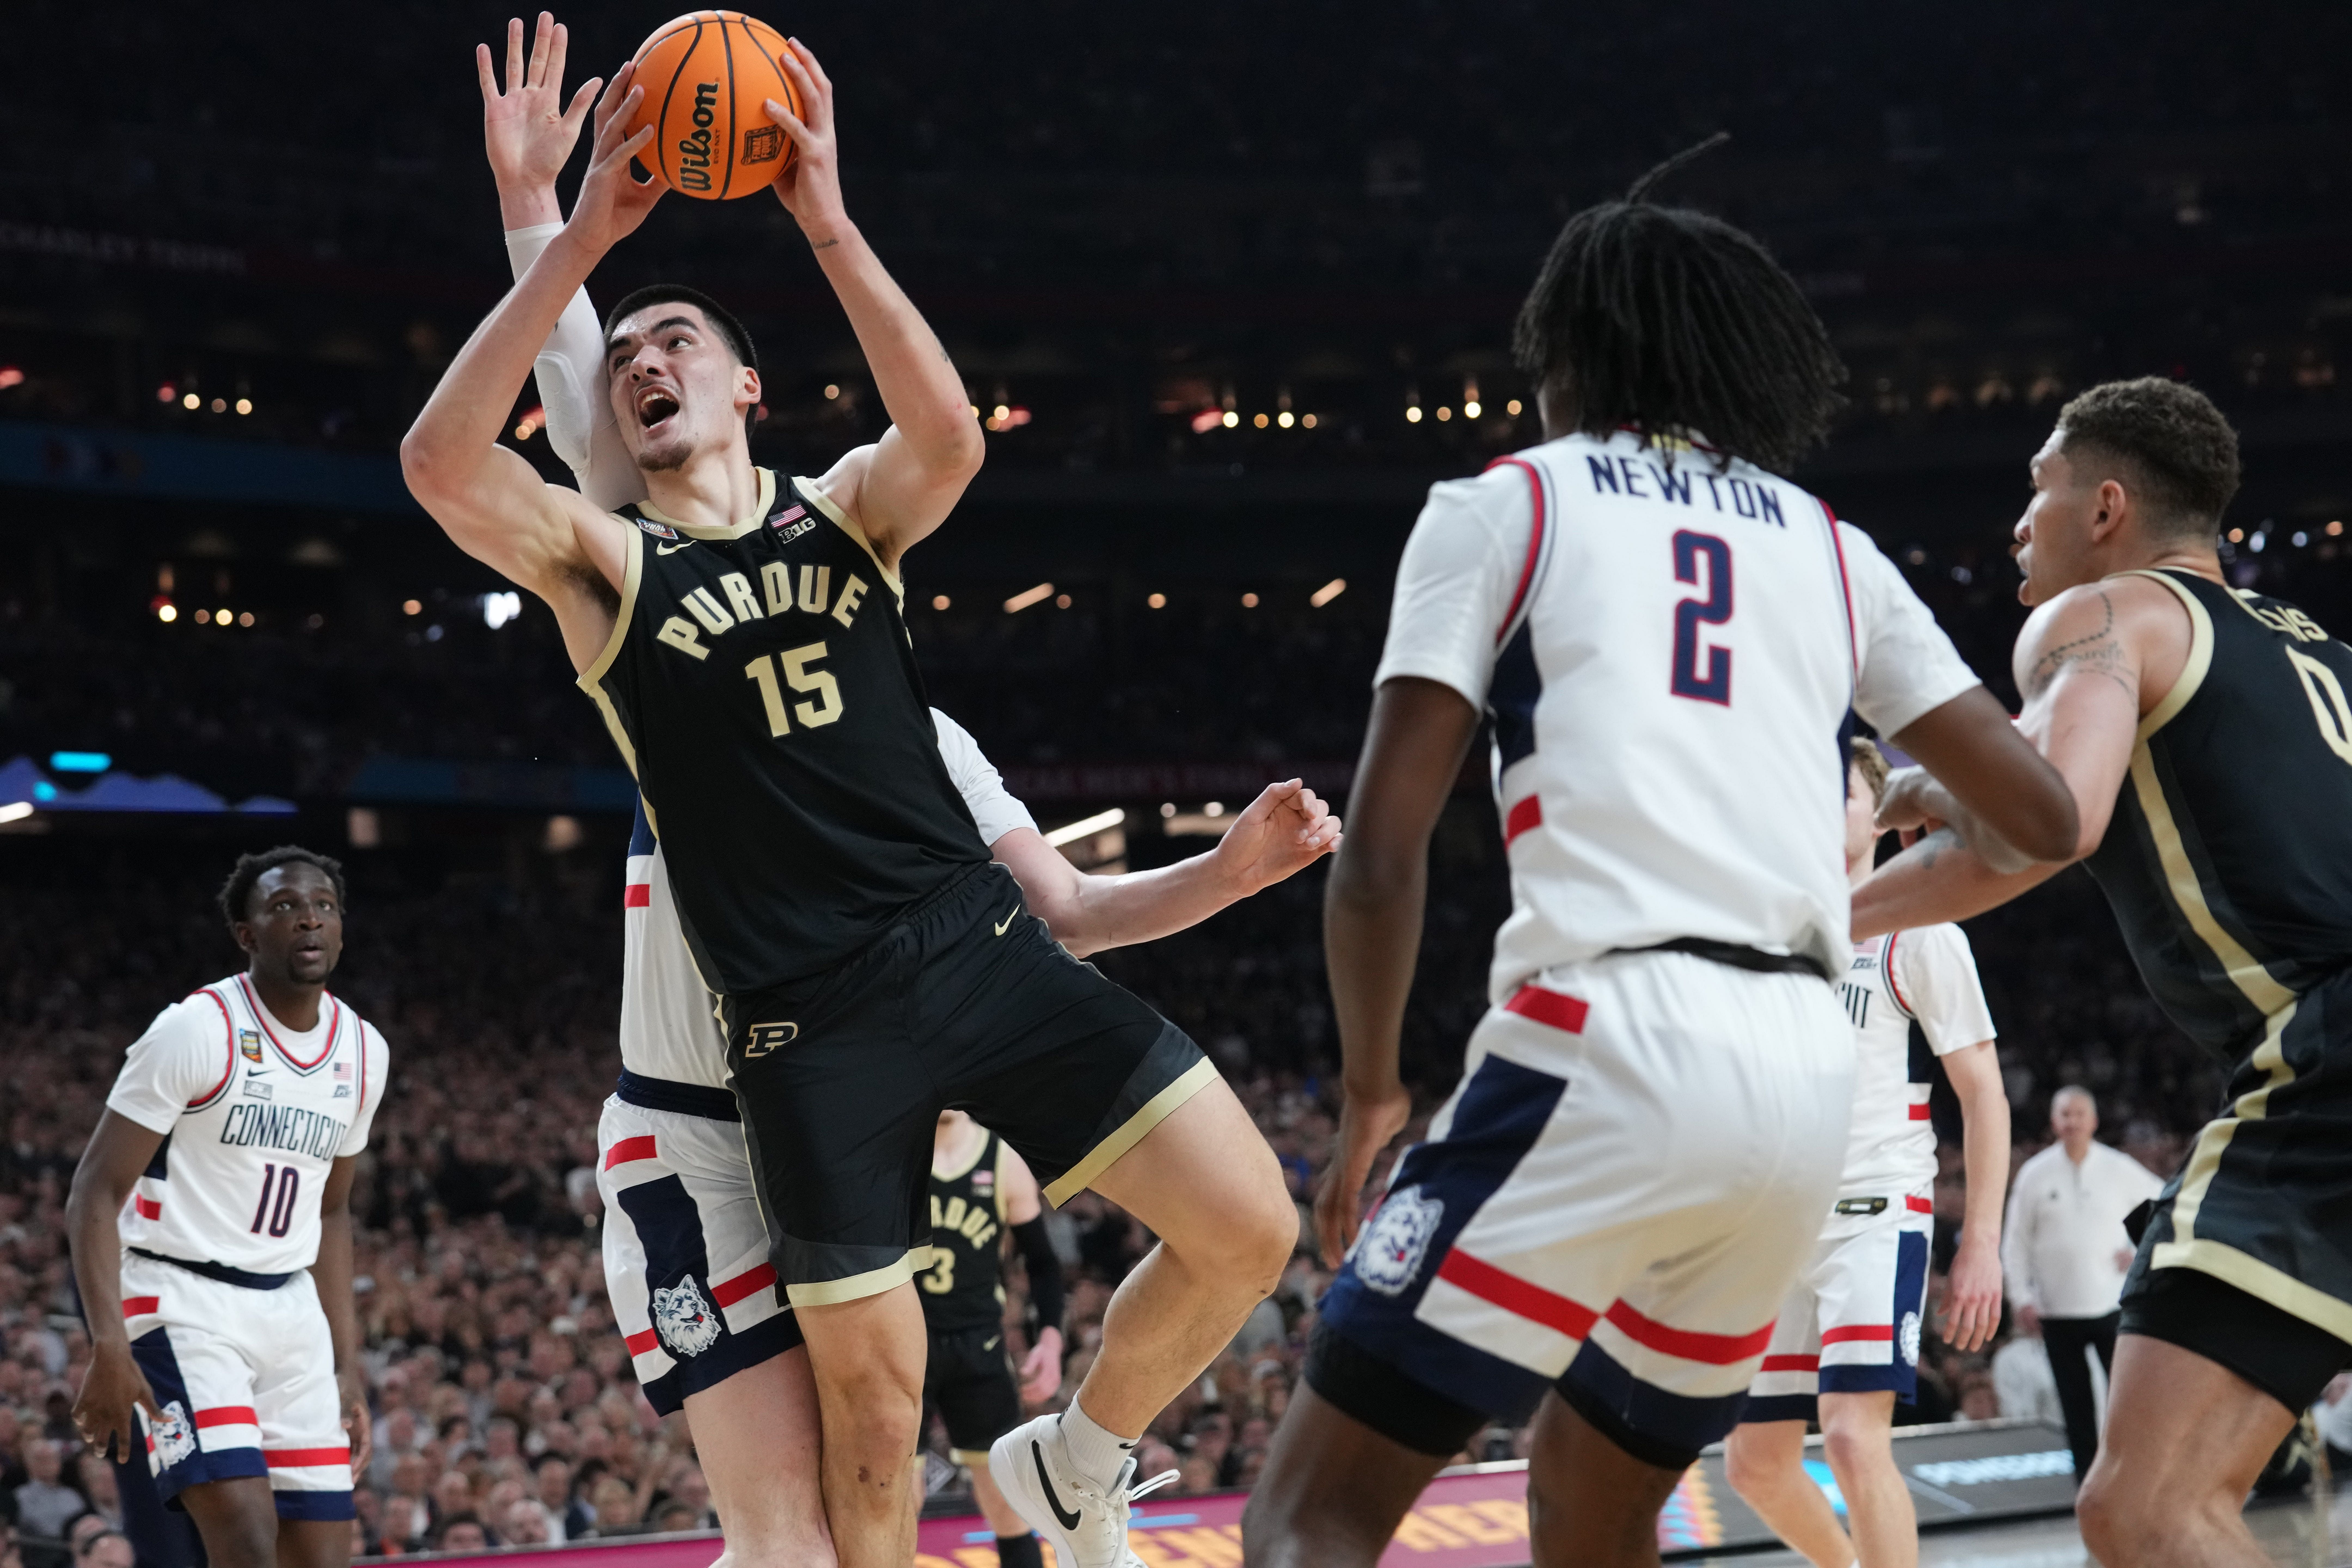 Purdue center Zach Edey is one high-profile player who is at the NBA Draft combine.